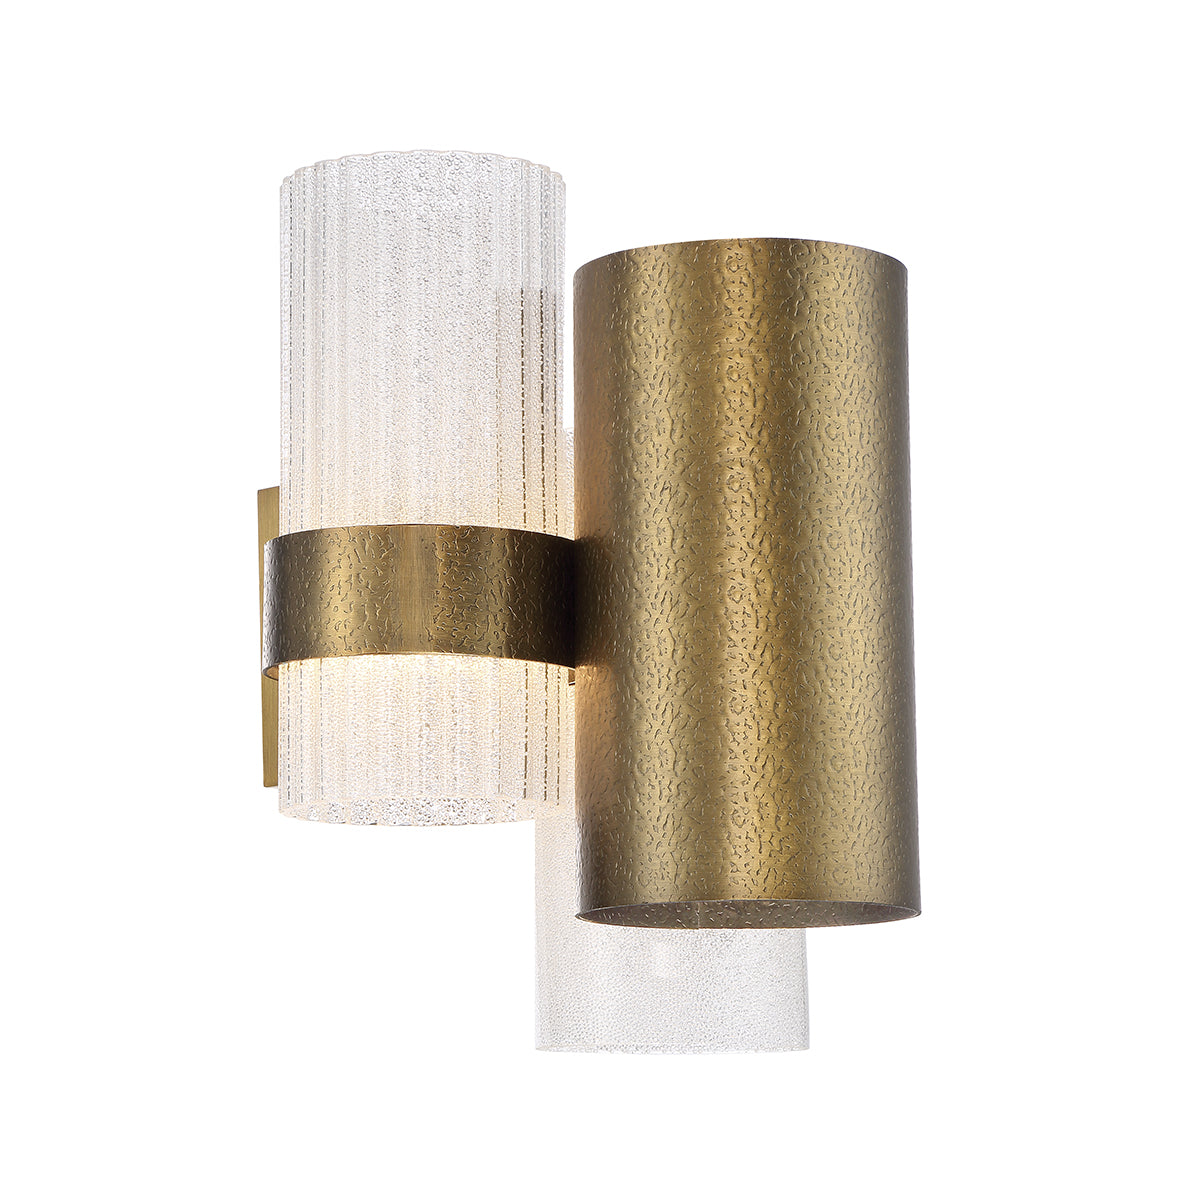 Modern Forms - WS-71014-AB - LED Wall Sconce - Harmony - Aged Brass